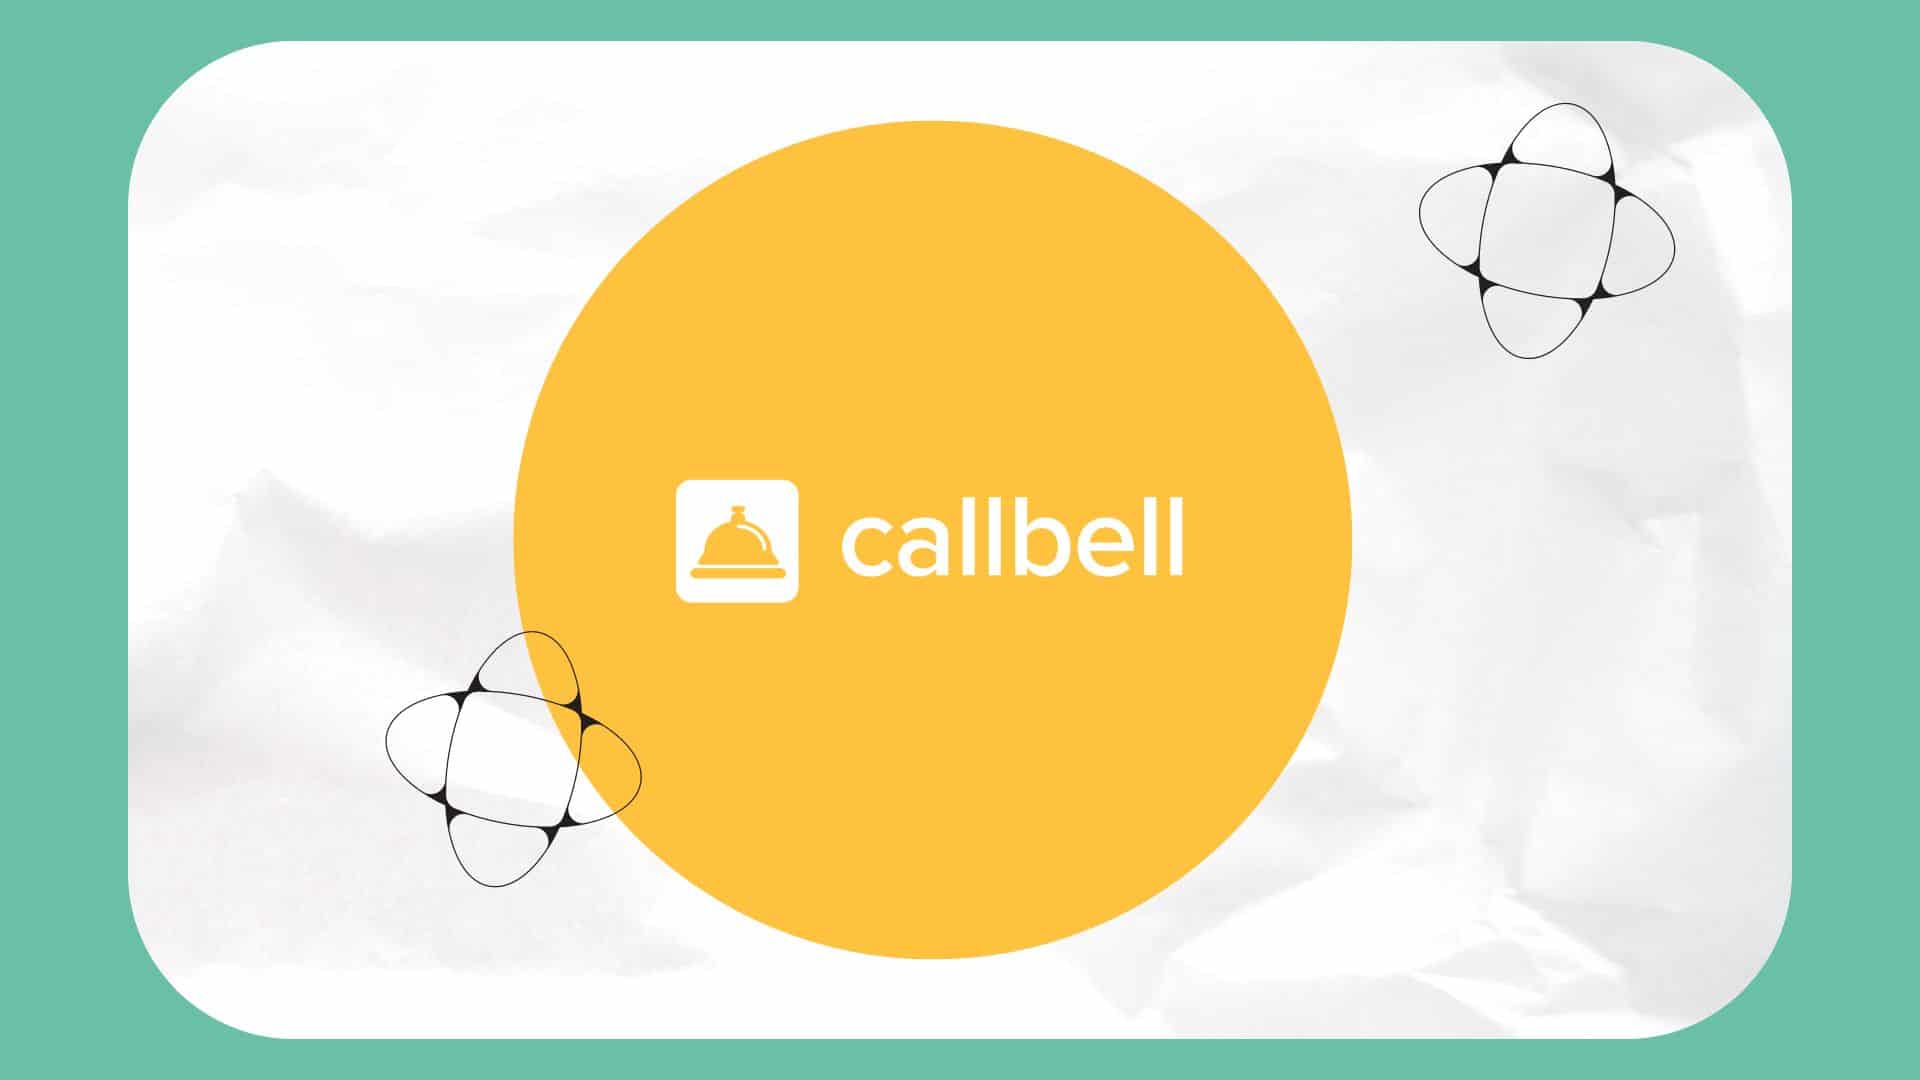 How Callbell Shop works